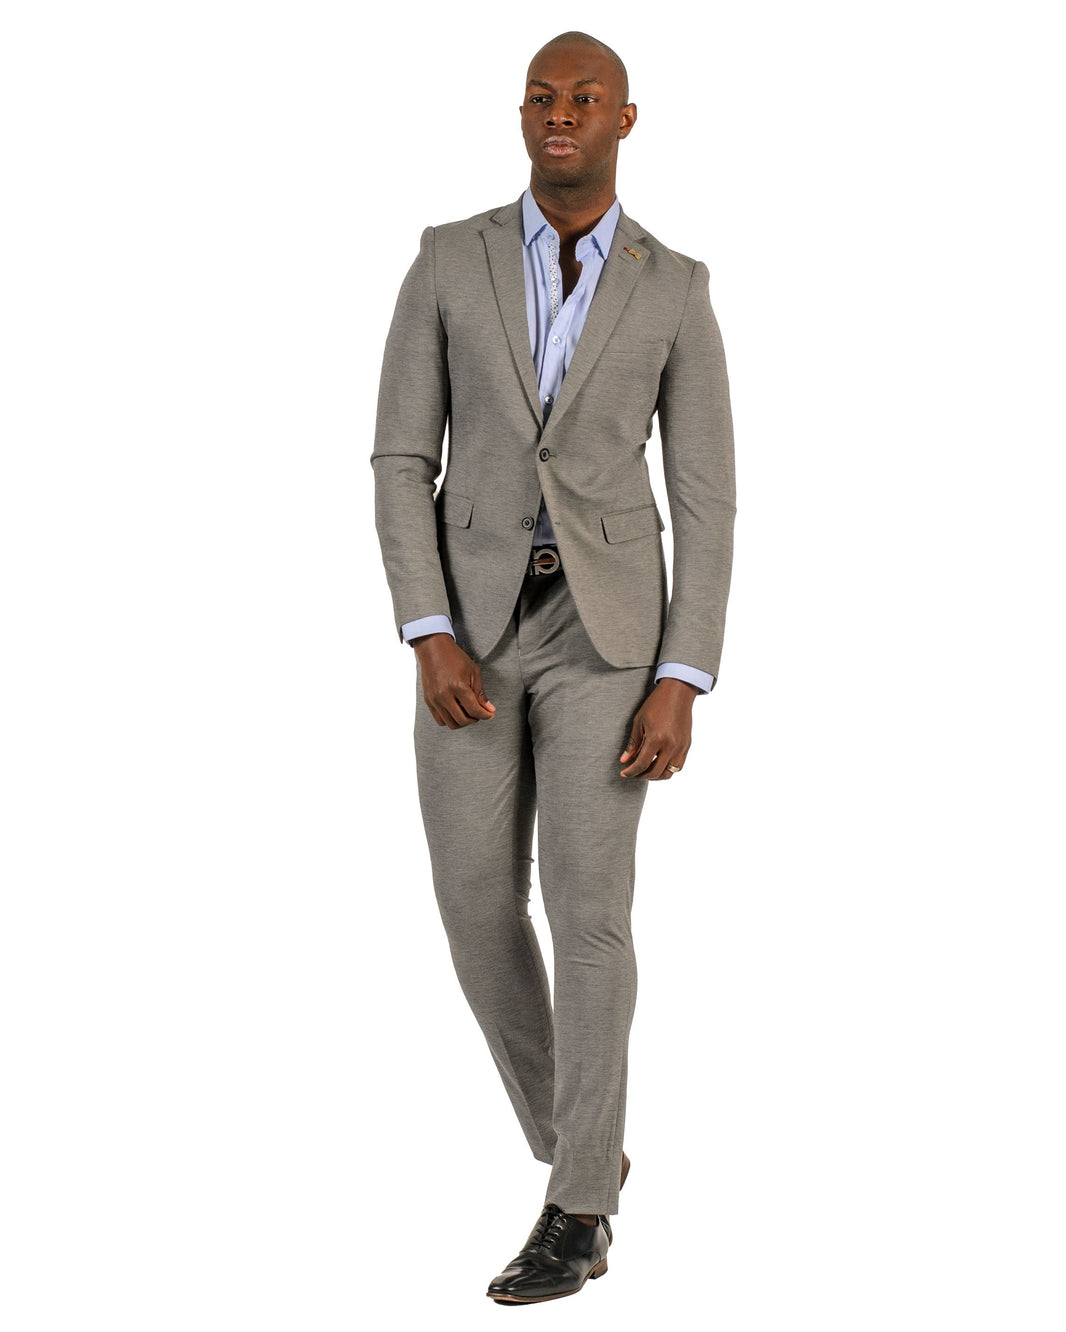 Giovanni Testi Brand offers a unique selection of Fashion Forward Suit